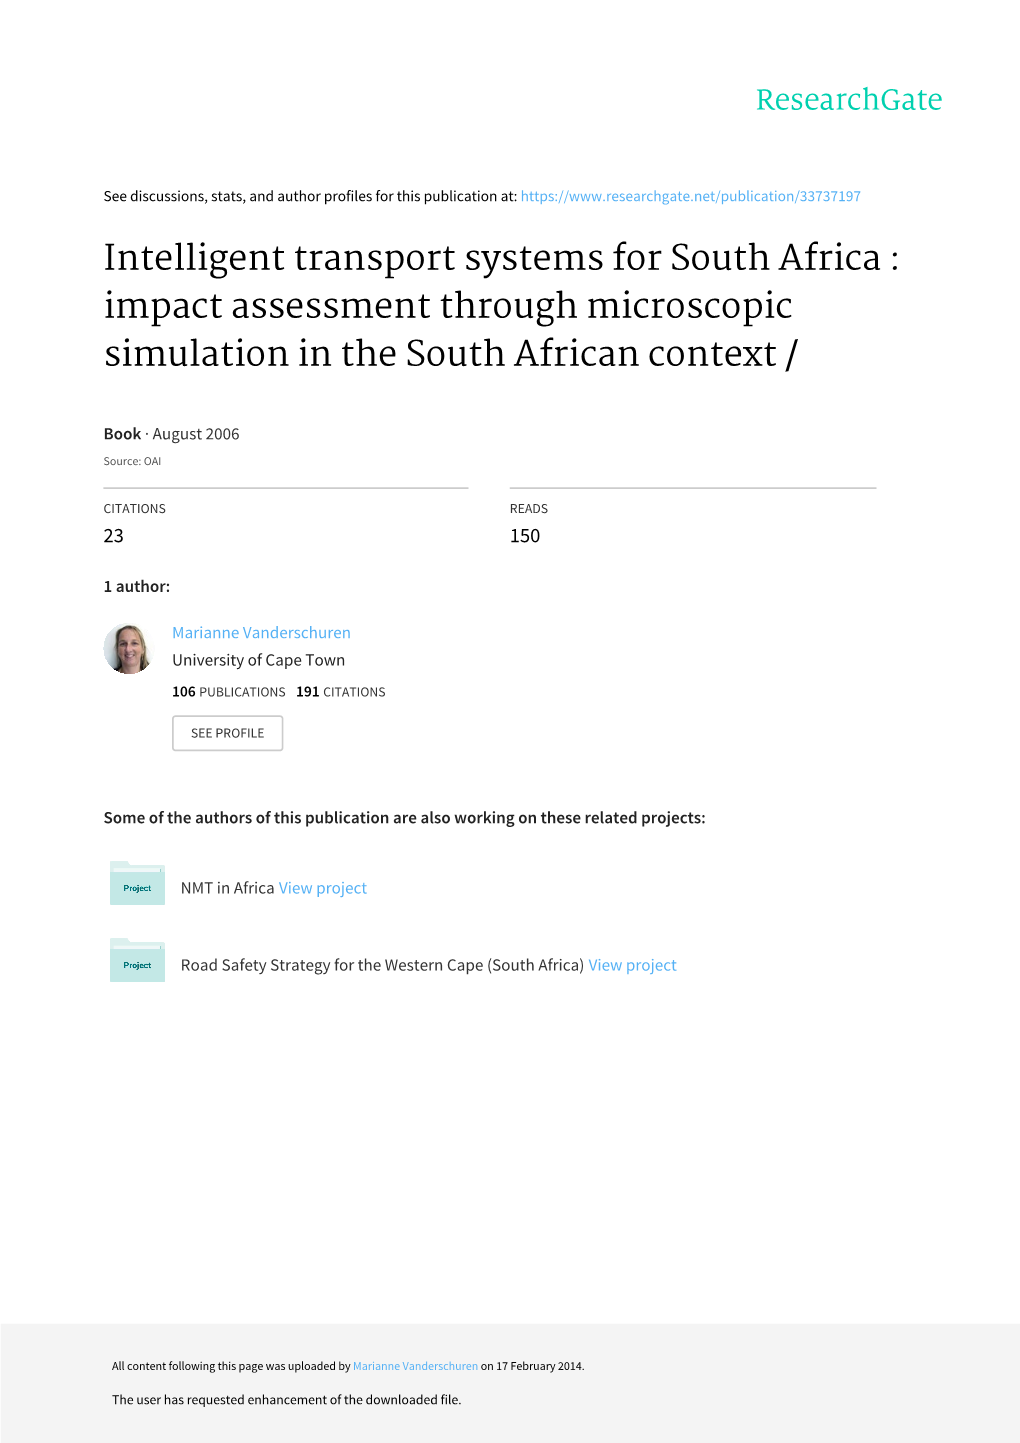 Intelligent Transport Systems for South Africa : Impact Assessment Through Microscopic Simulation in the South African Context